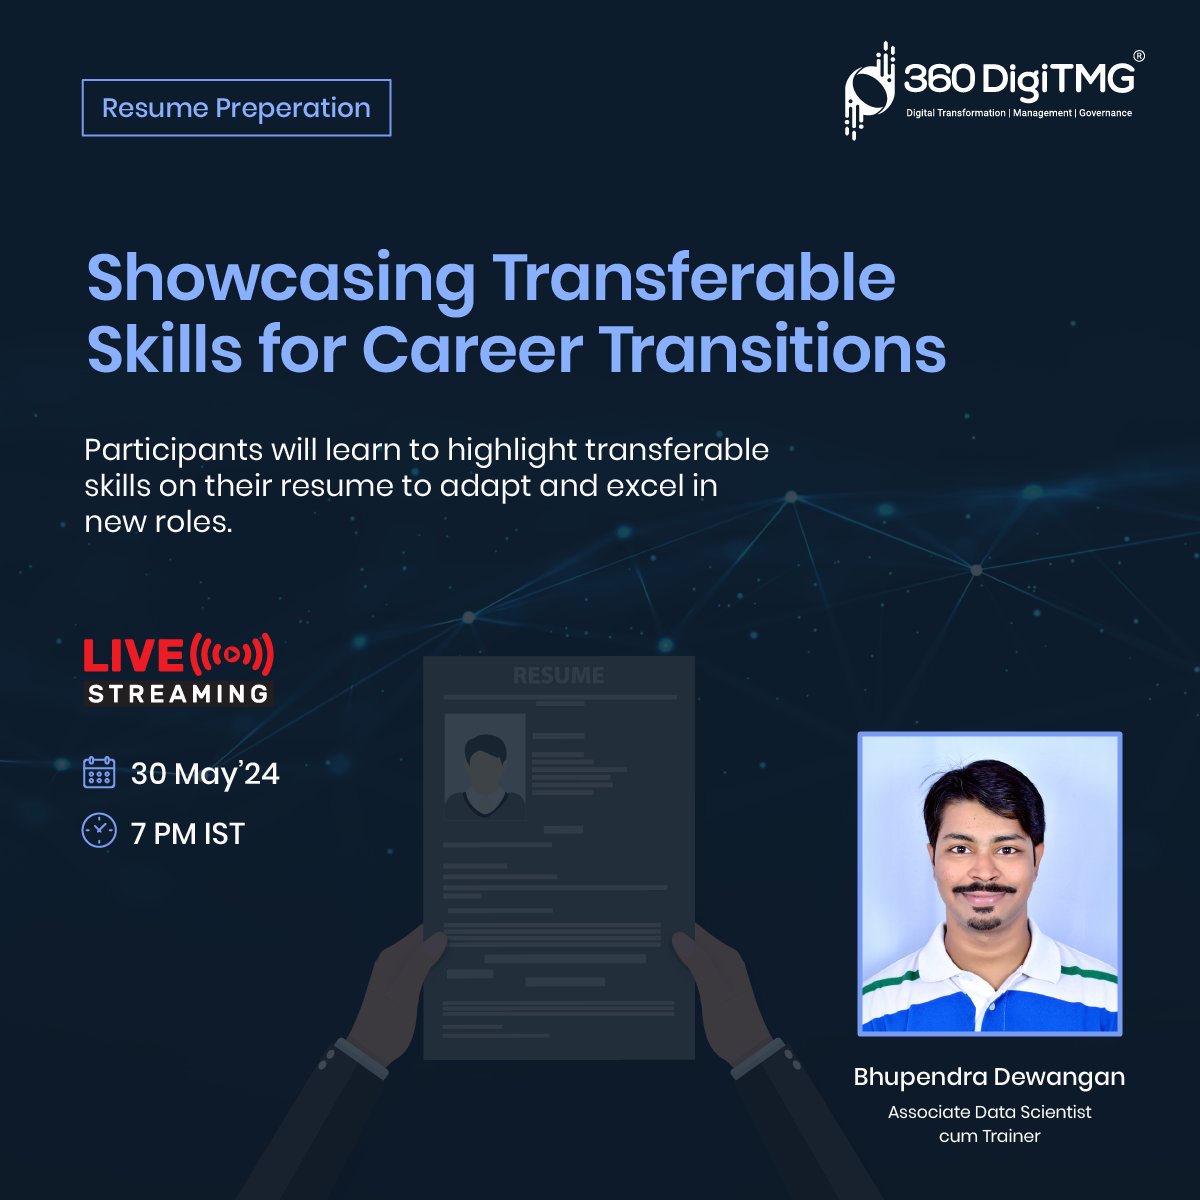 📄 Ready to embark on your dream career journey? Join us on May 30th at 7:00 PM IST for an exciting expedition! 🚀 

📱 Stay updated! Join our WhatsApp Channel for further updates:📱
🔗 360digitmg.in/360DigiTMG-wha…

Tap the link below to join the session:
🔗360digitmg.in/resume-buildin…